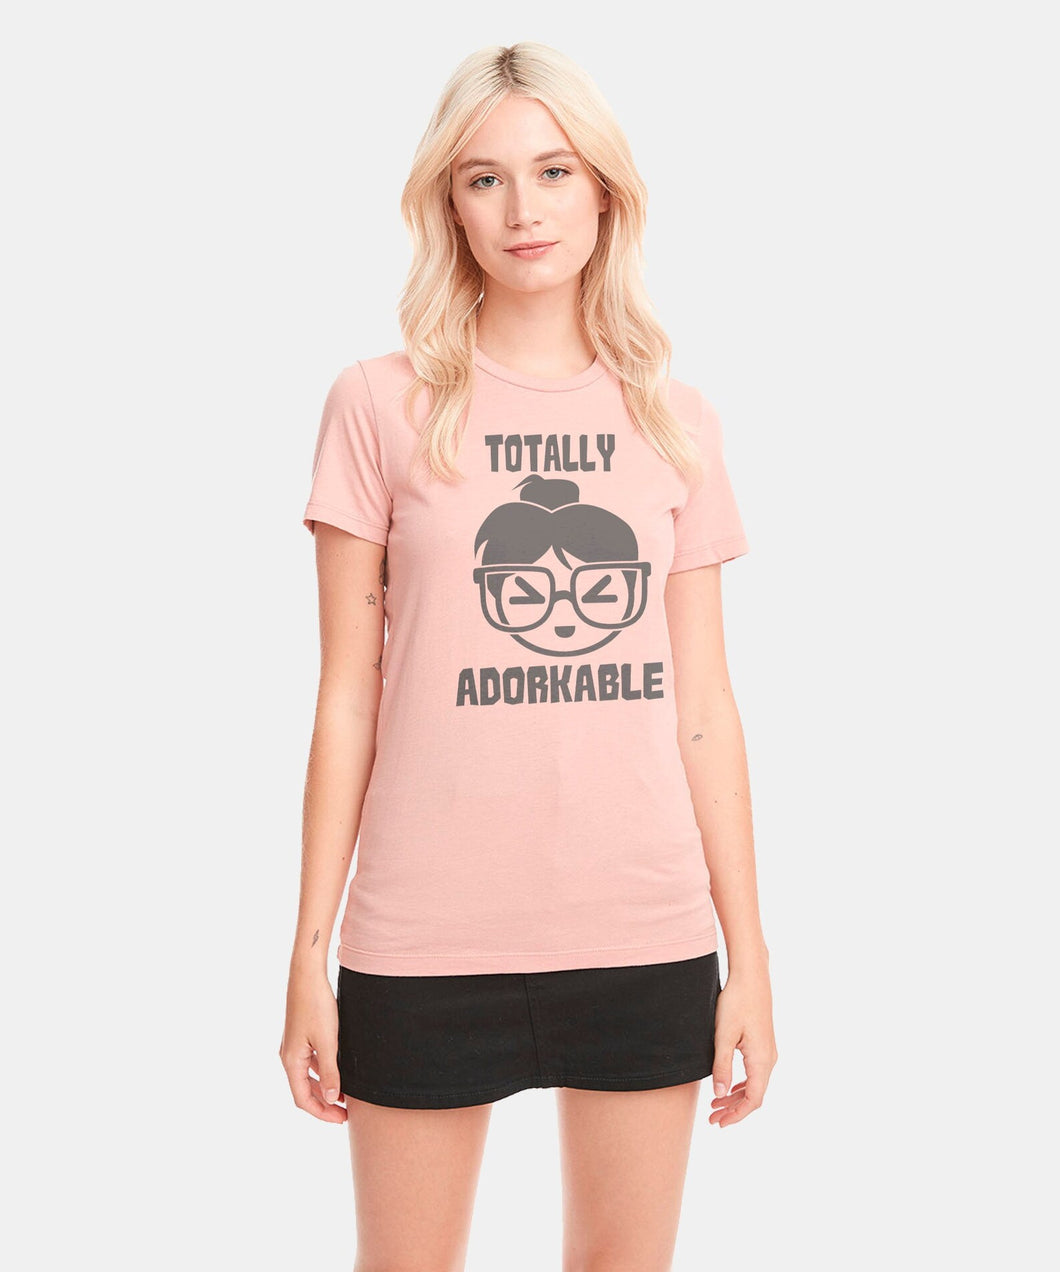 Totally Adorkable Women's T-shirt